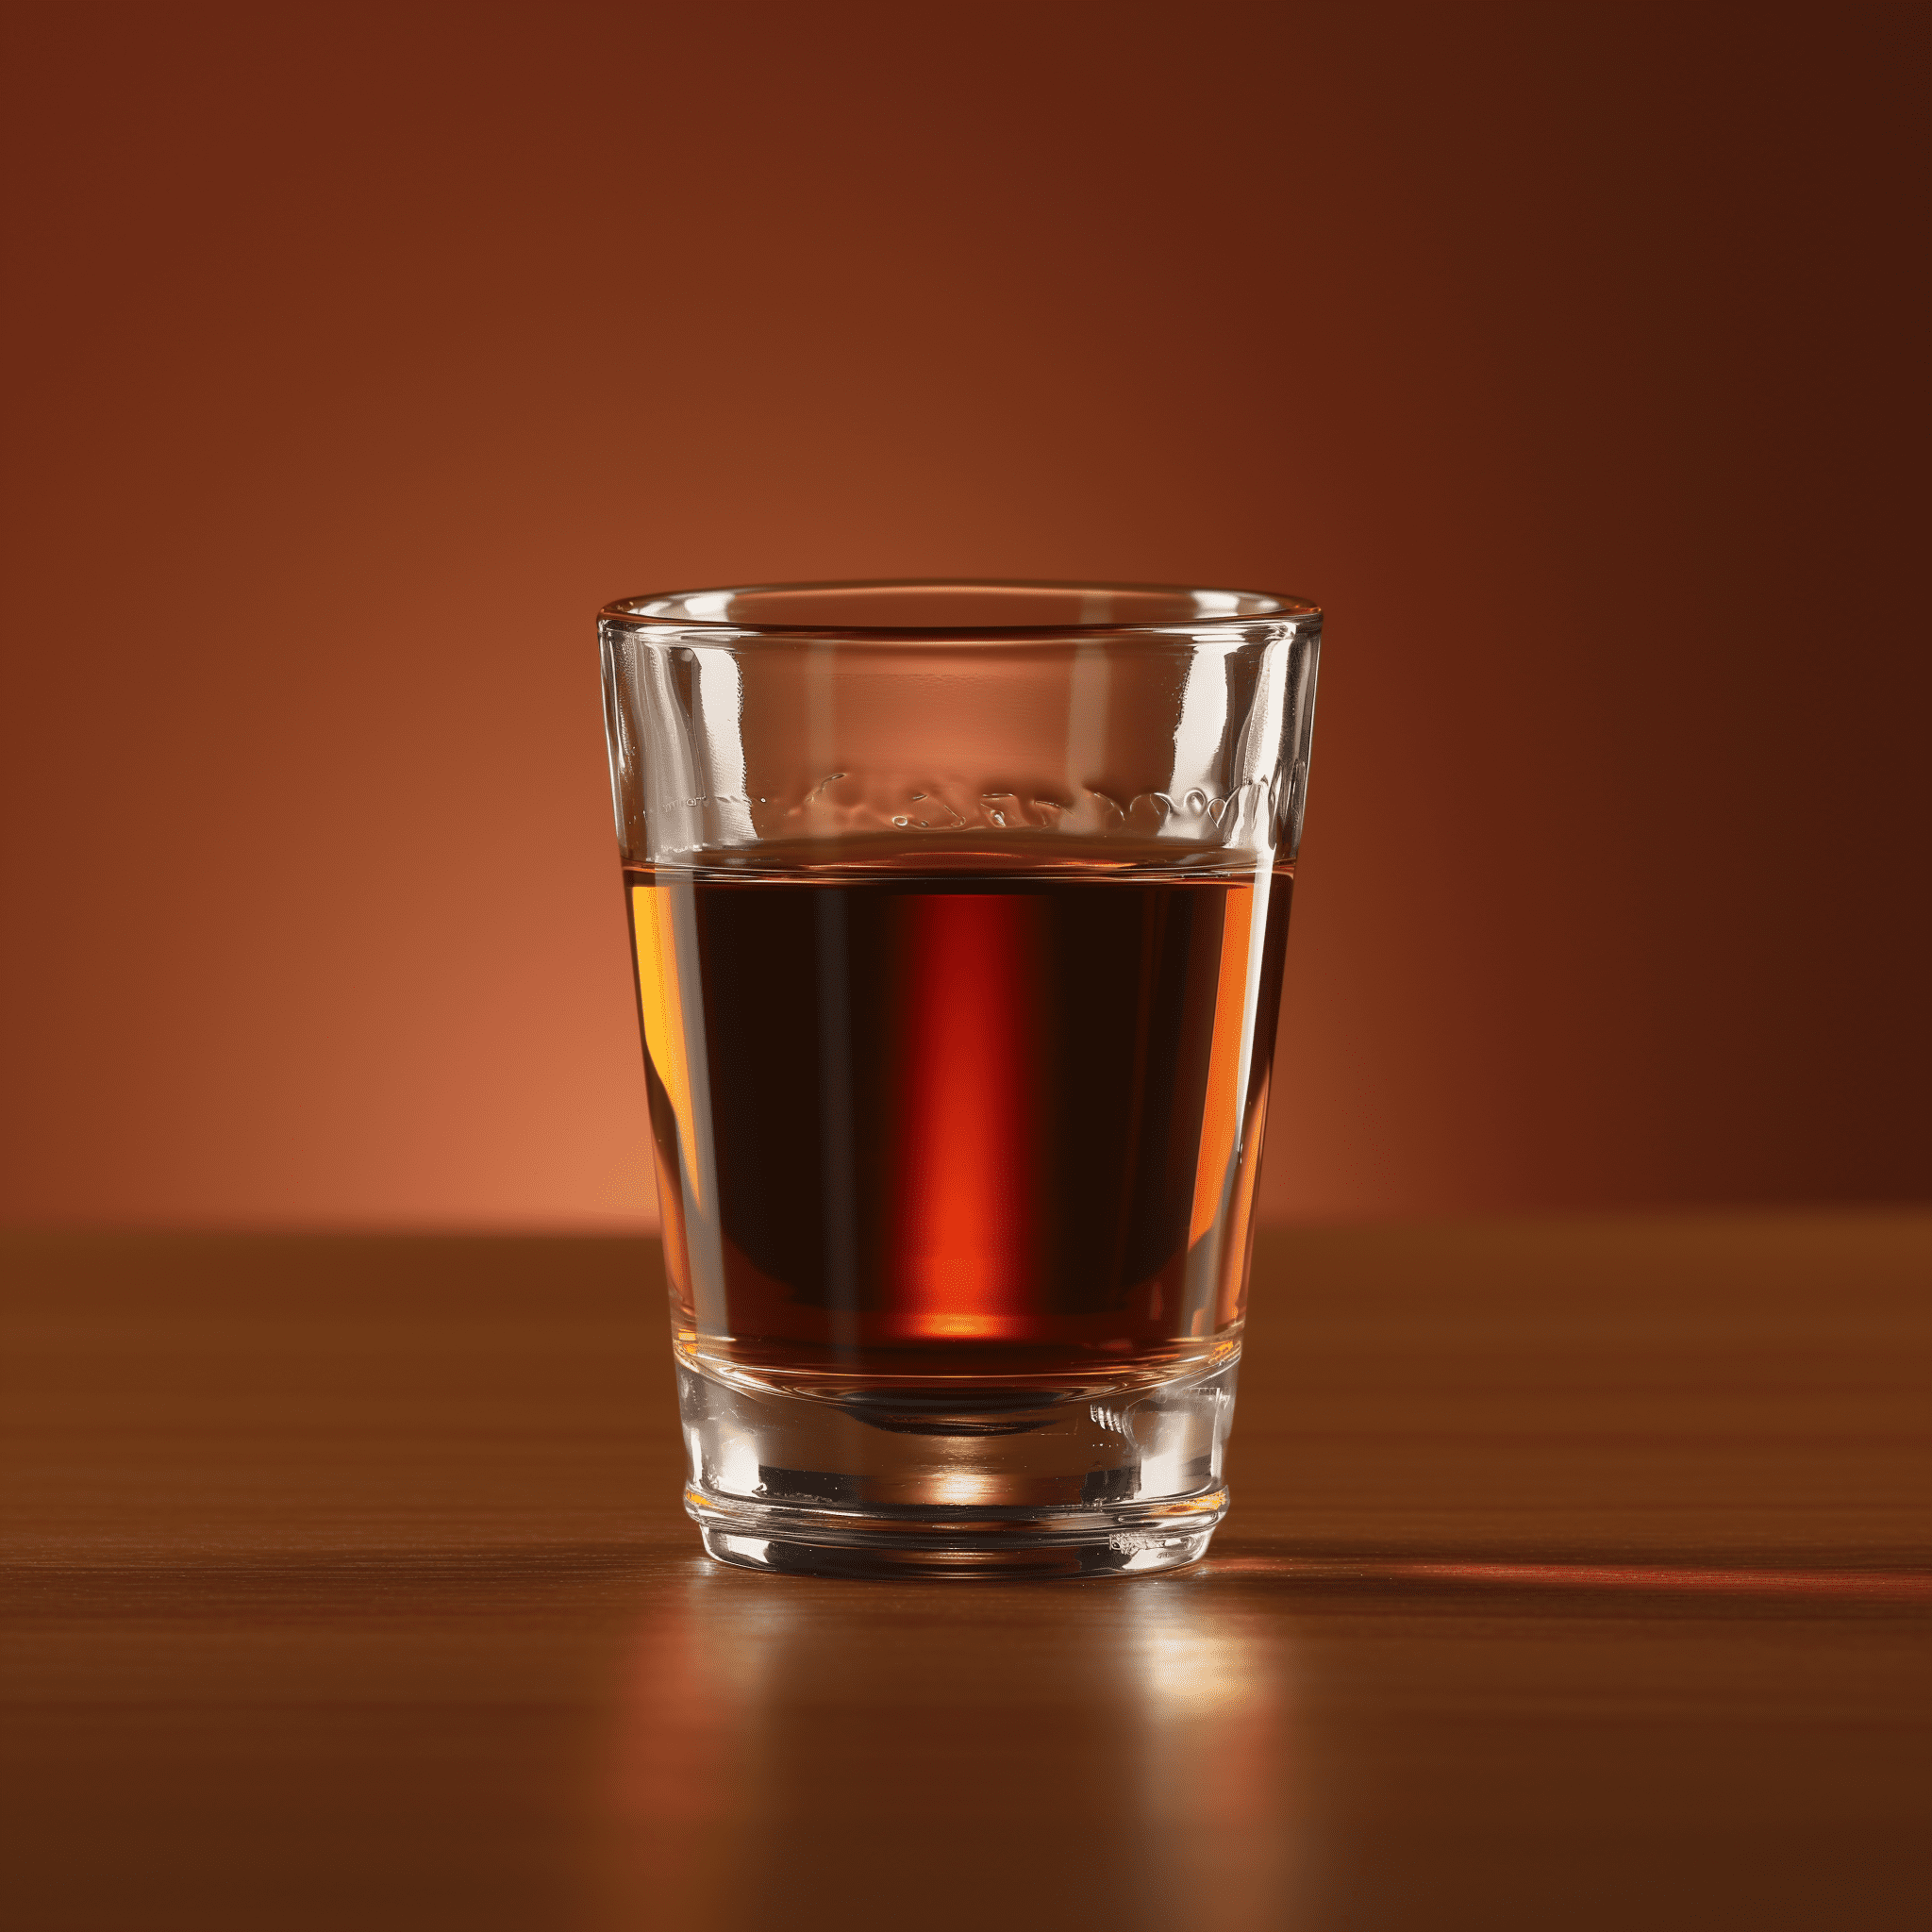 Black Tea Shot Recipe - The Black Tea Shot offers a harmonious blend of the deep, malty flavors of black tea with the caramel and vanilla notes of bourbon, complemented by the natural sweetness and smoothness of honey. The lemon garnish adds a refreshing zest that brightens the overall experience.